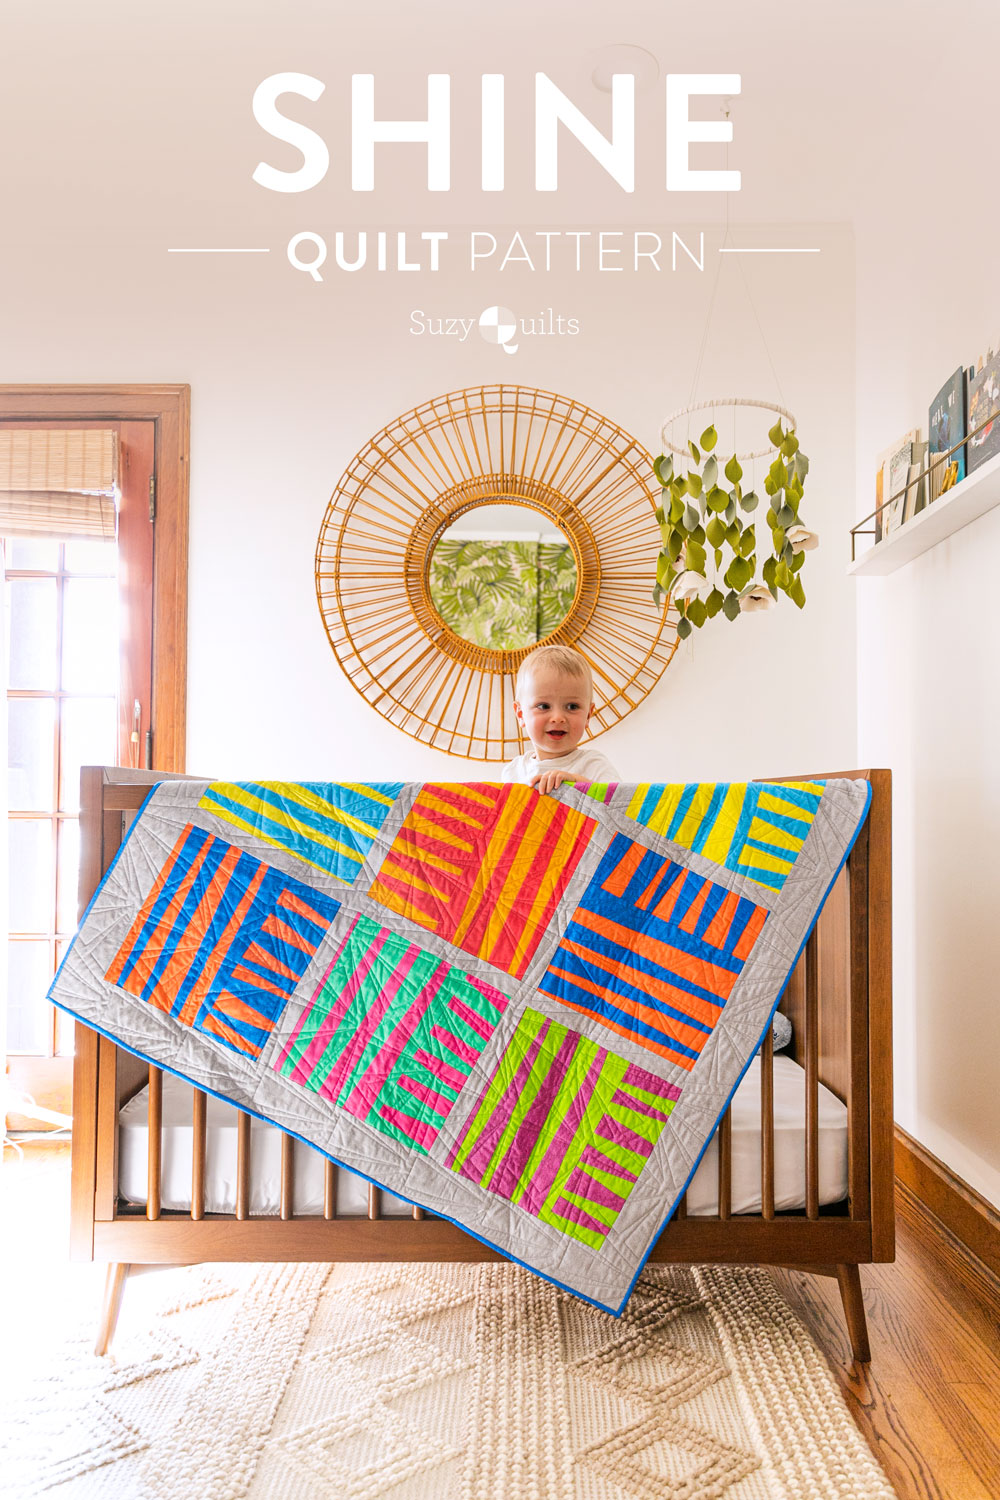 The Shine quilt sew along includes lots of added tips and videos to help you make this modern quilt pattern. This fat quarter quilt pattern is beginner friendly and focuses on improv sewing. suzyquilts.com #qal #quilting